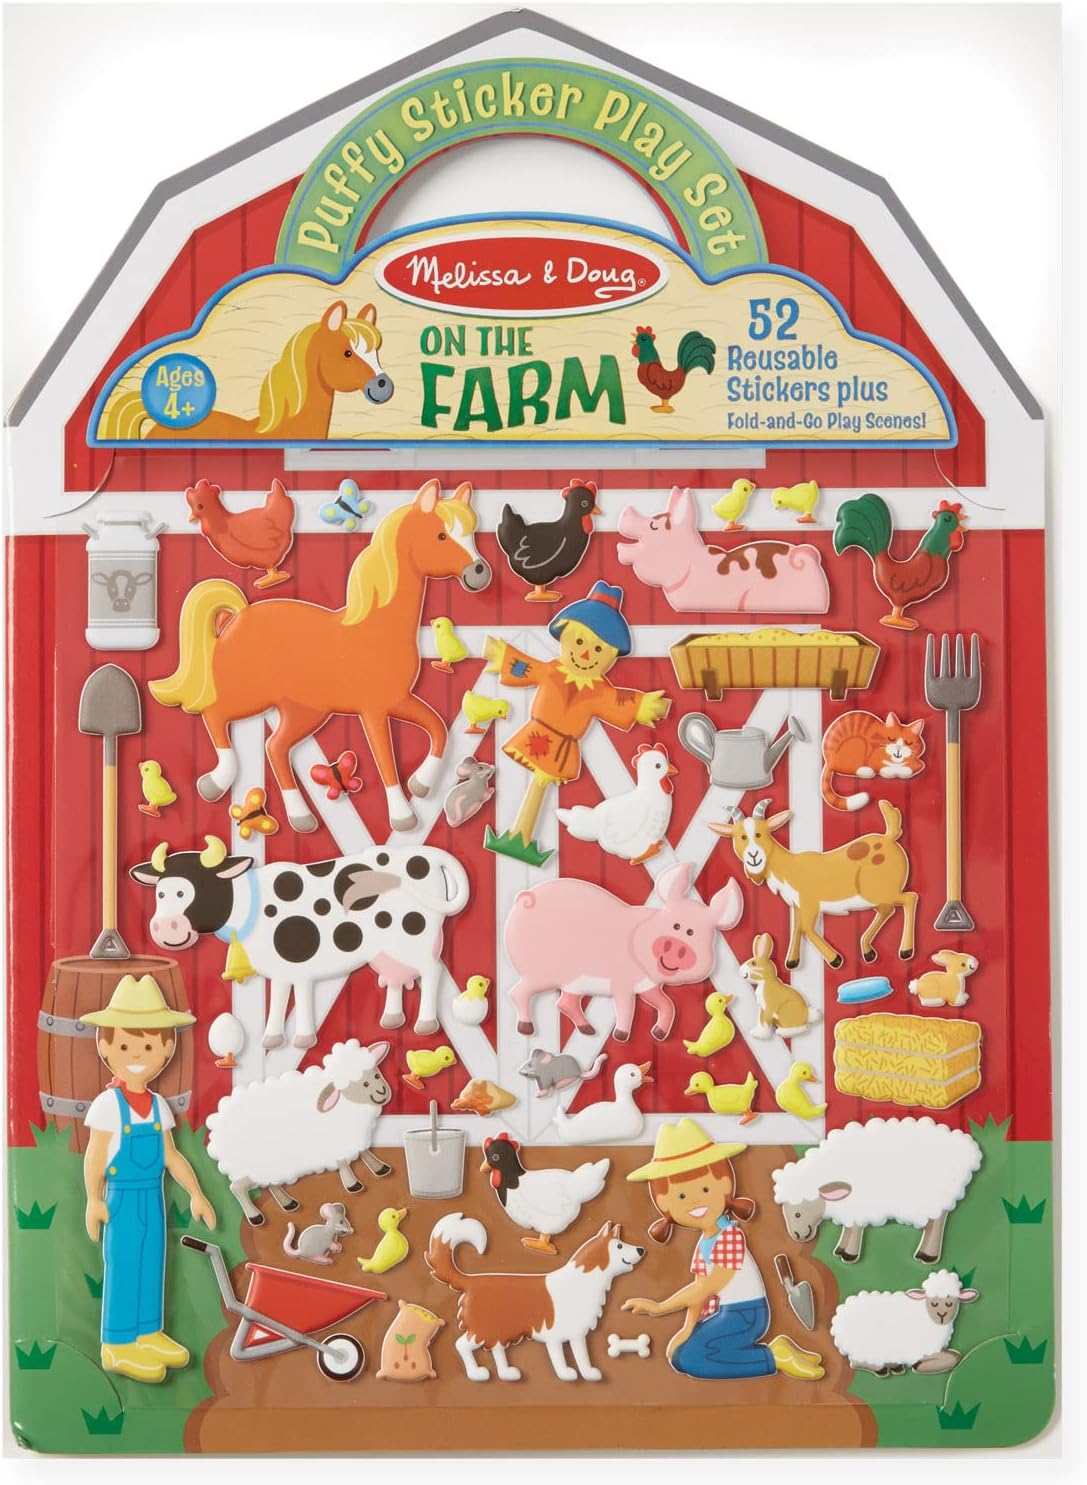 Melissa  Doug Puffy Sticker Play Set - On the Farm - 52 Reusable Stickers, 2 Fold-Out Scenes - Restickable Farm Sticker Book, Puffy Farm Animals Removable Stickers For Kids Ages 4+